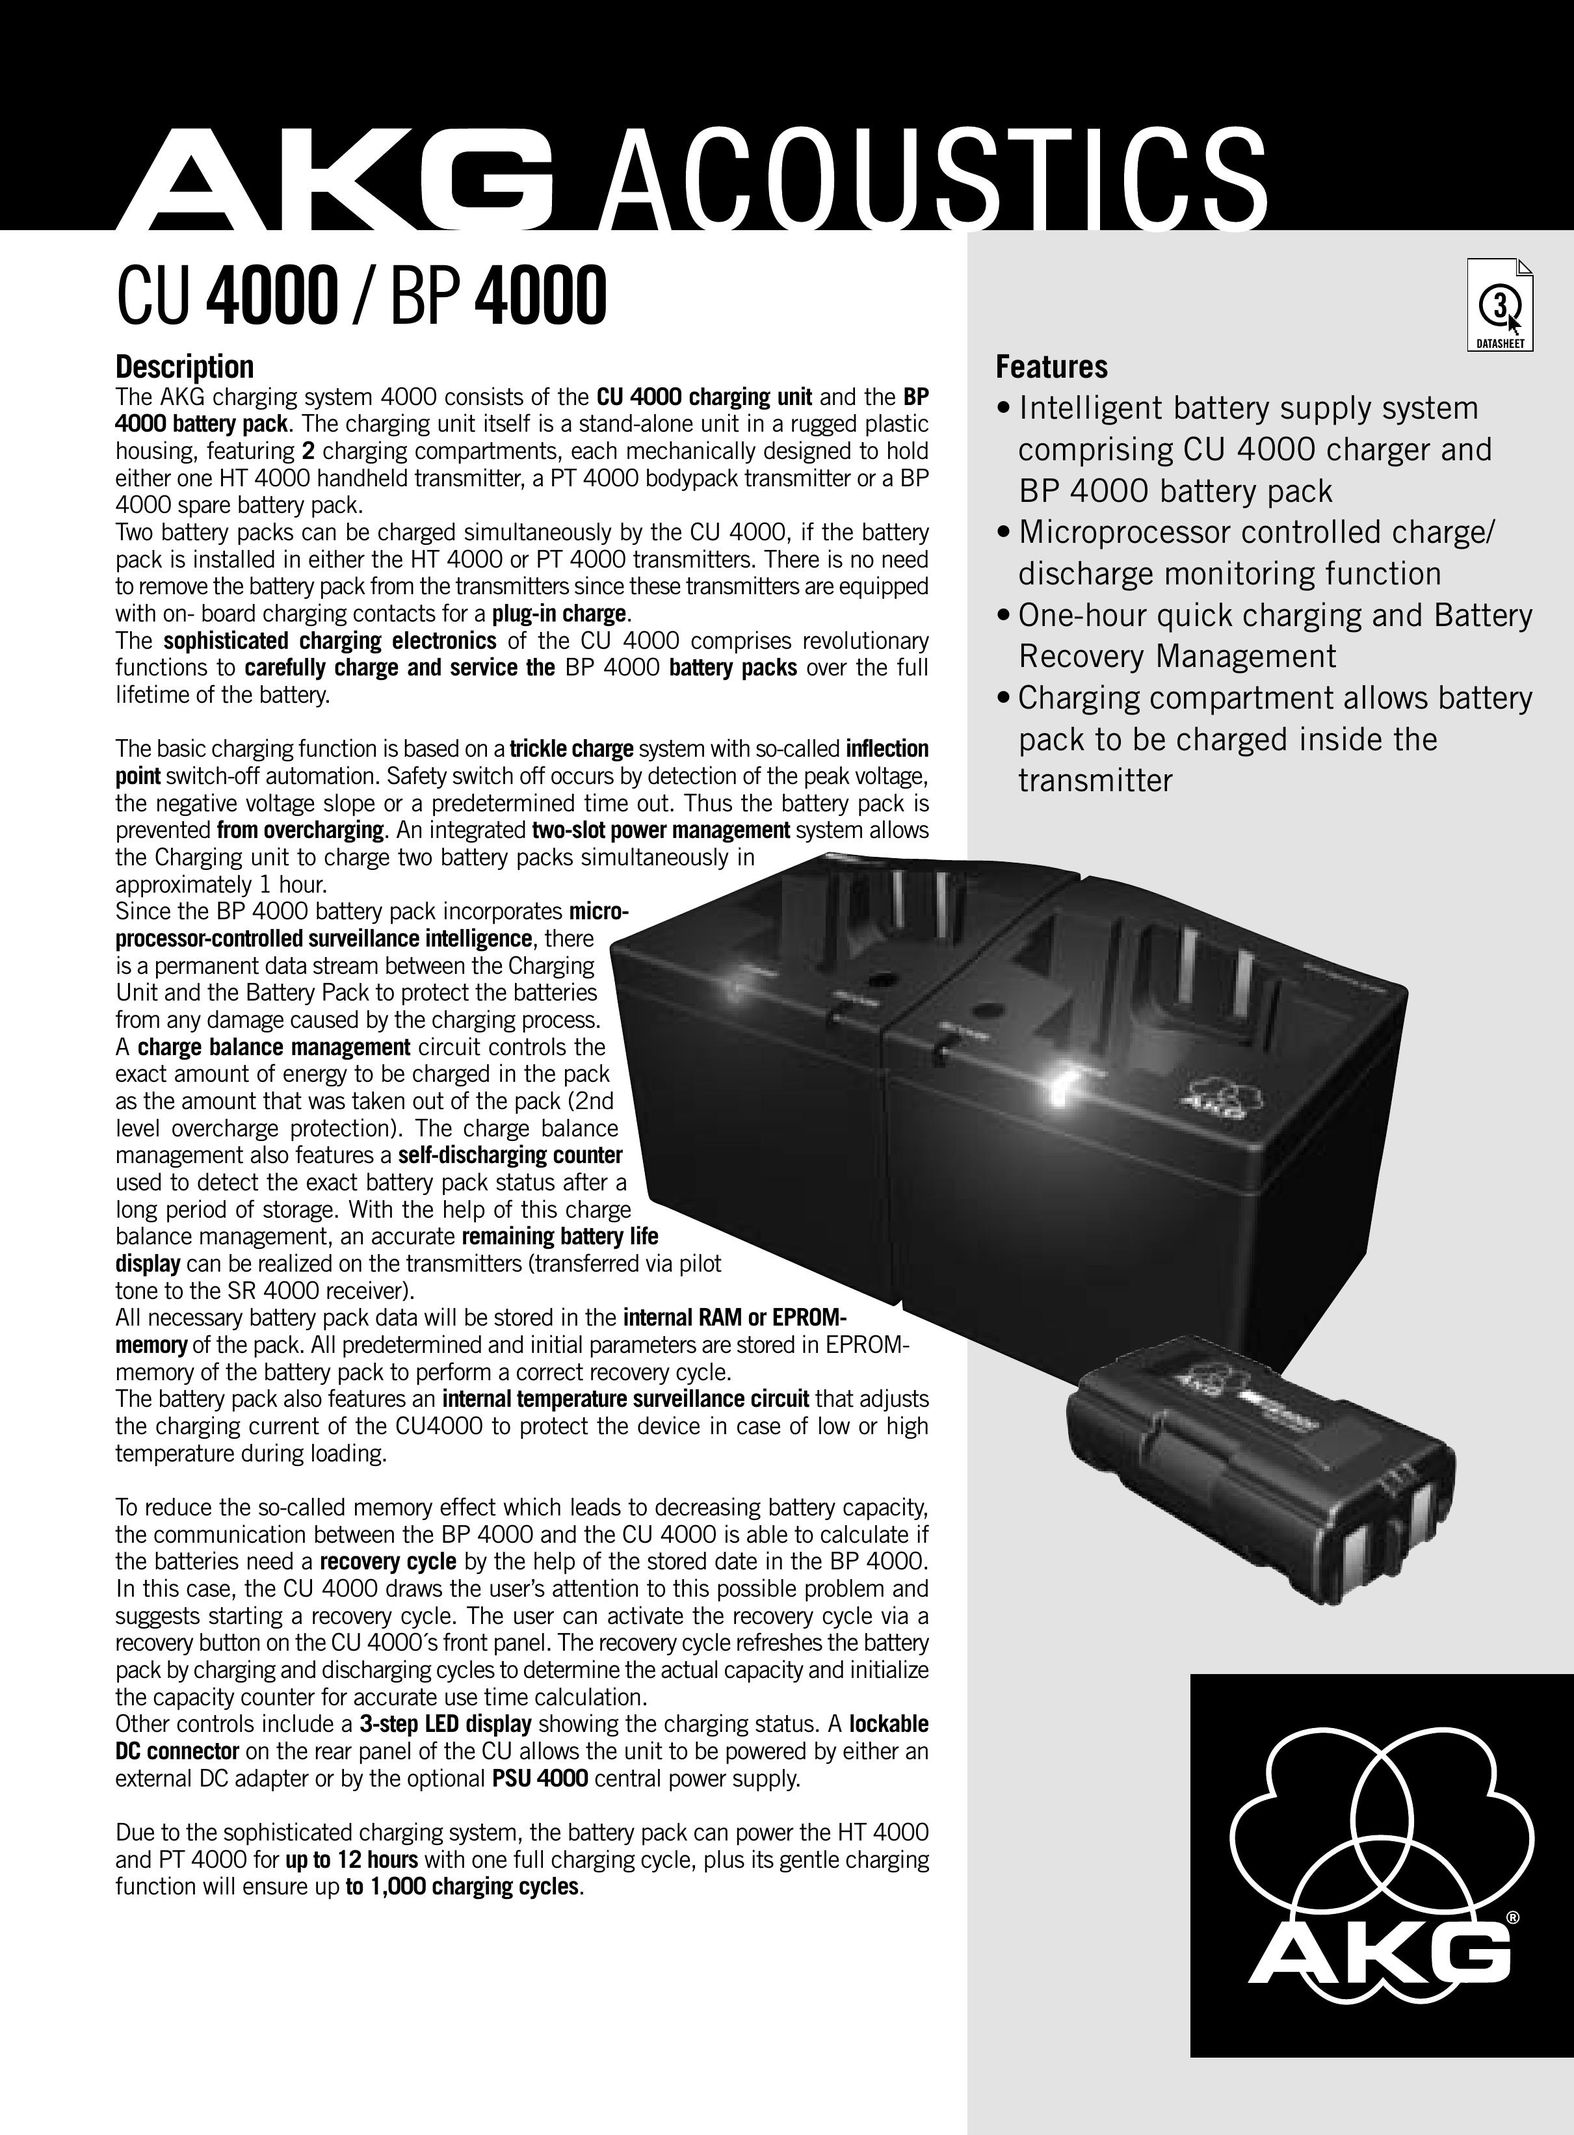 AKG Acoustics BP 4000 Battery Charger User Manual (Page 1)